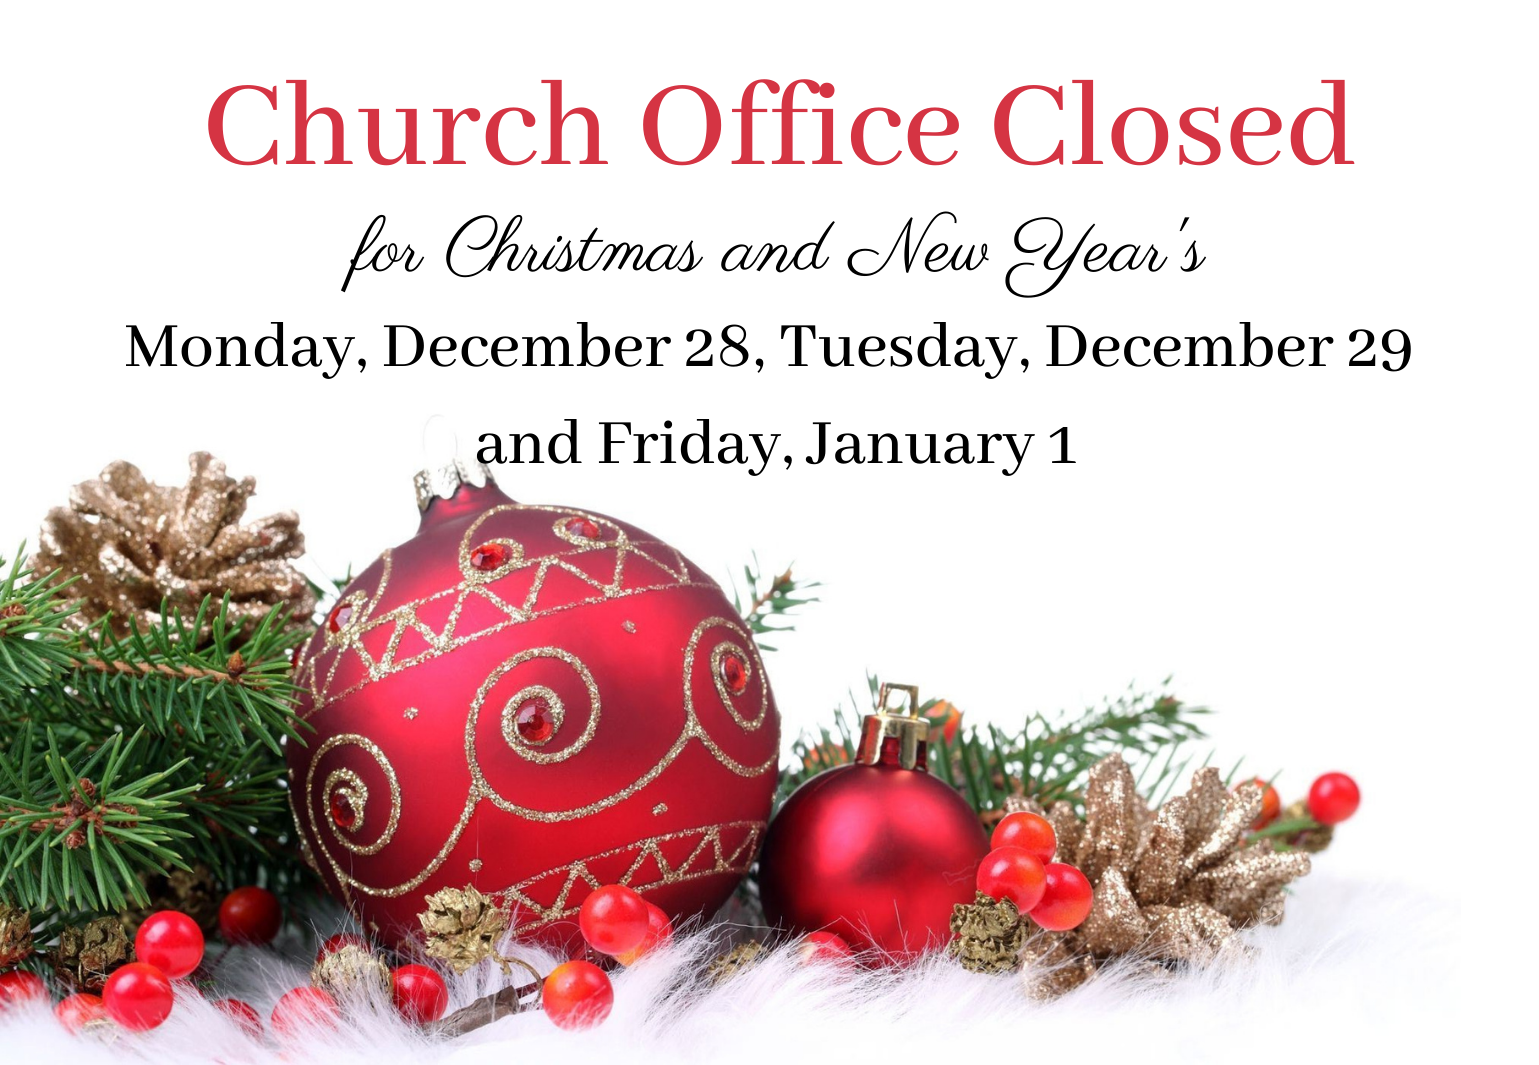 office-closed-signs-for-holidays-2021-christmas-christmas-images-2021